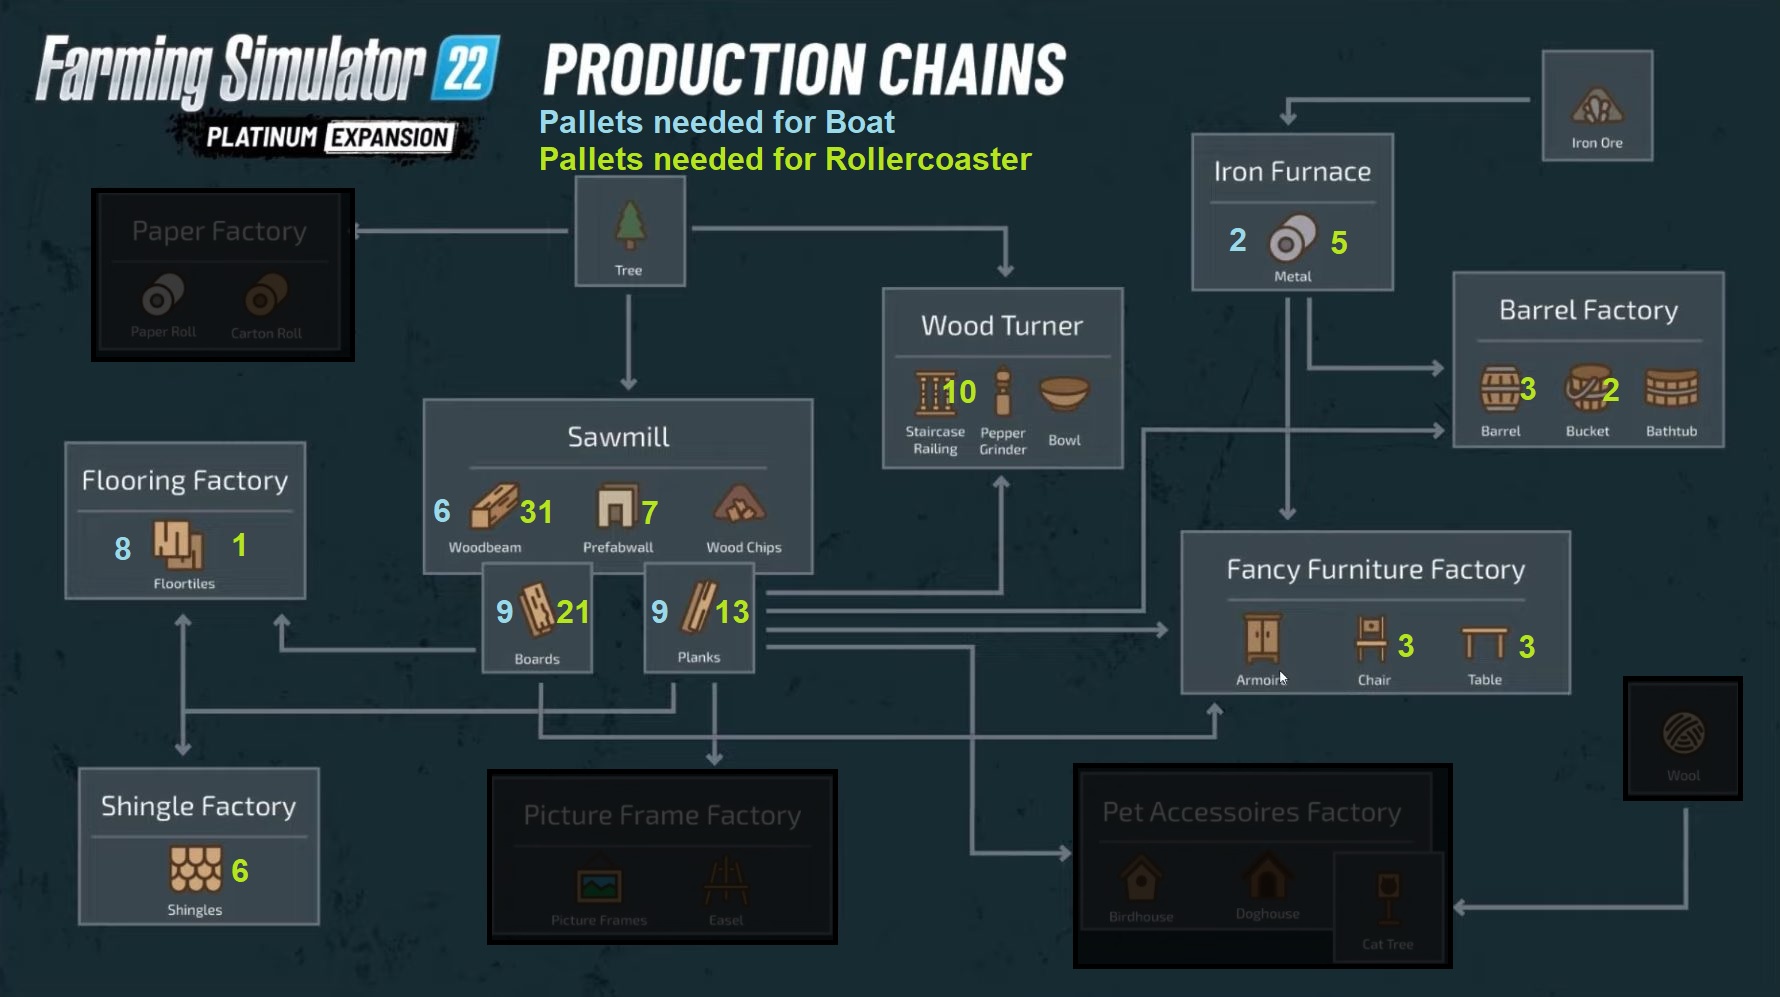 Platinum > required material (+production chain) image 1